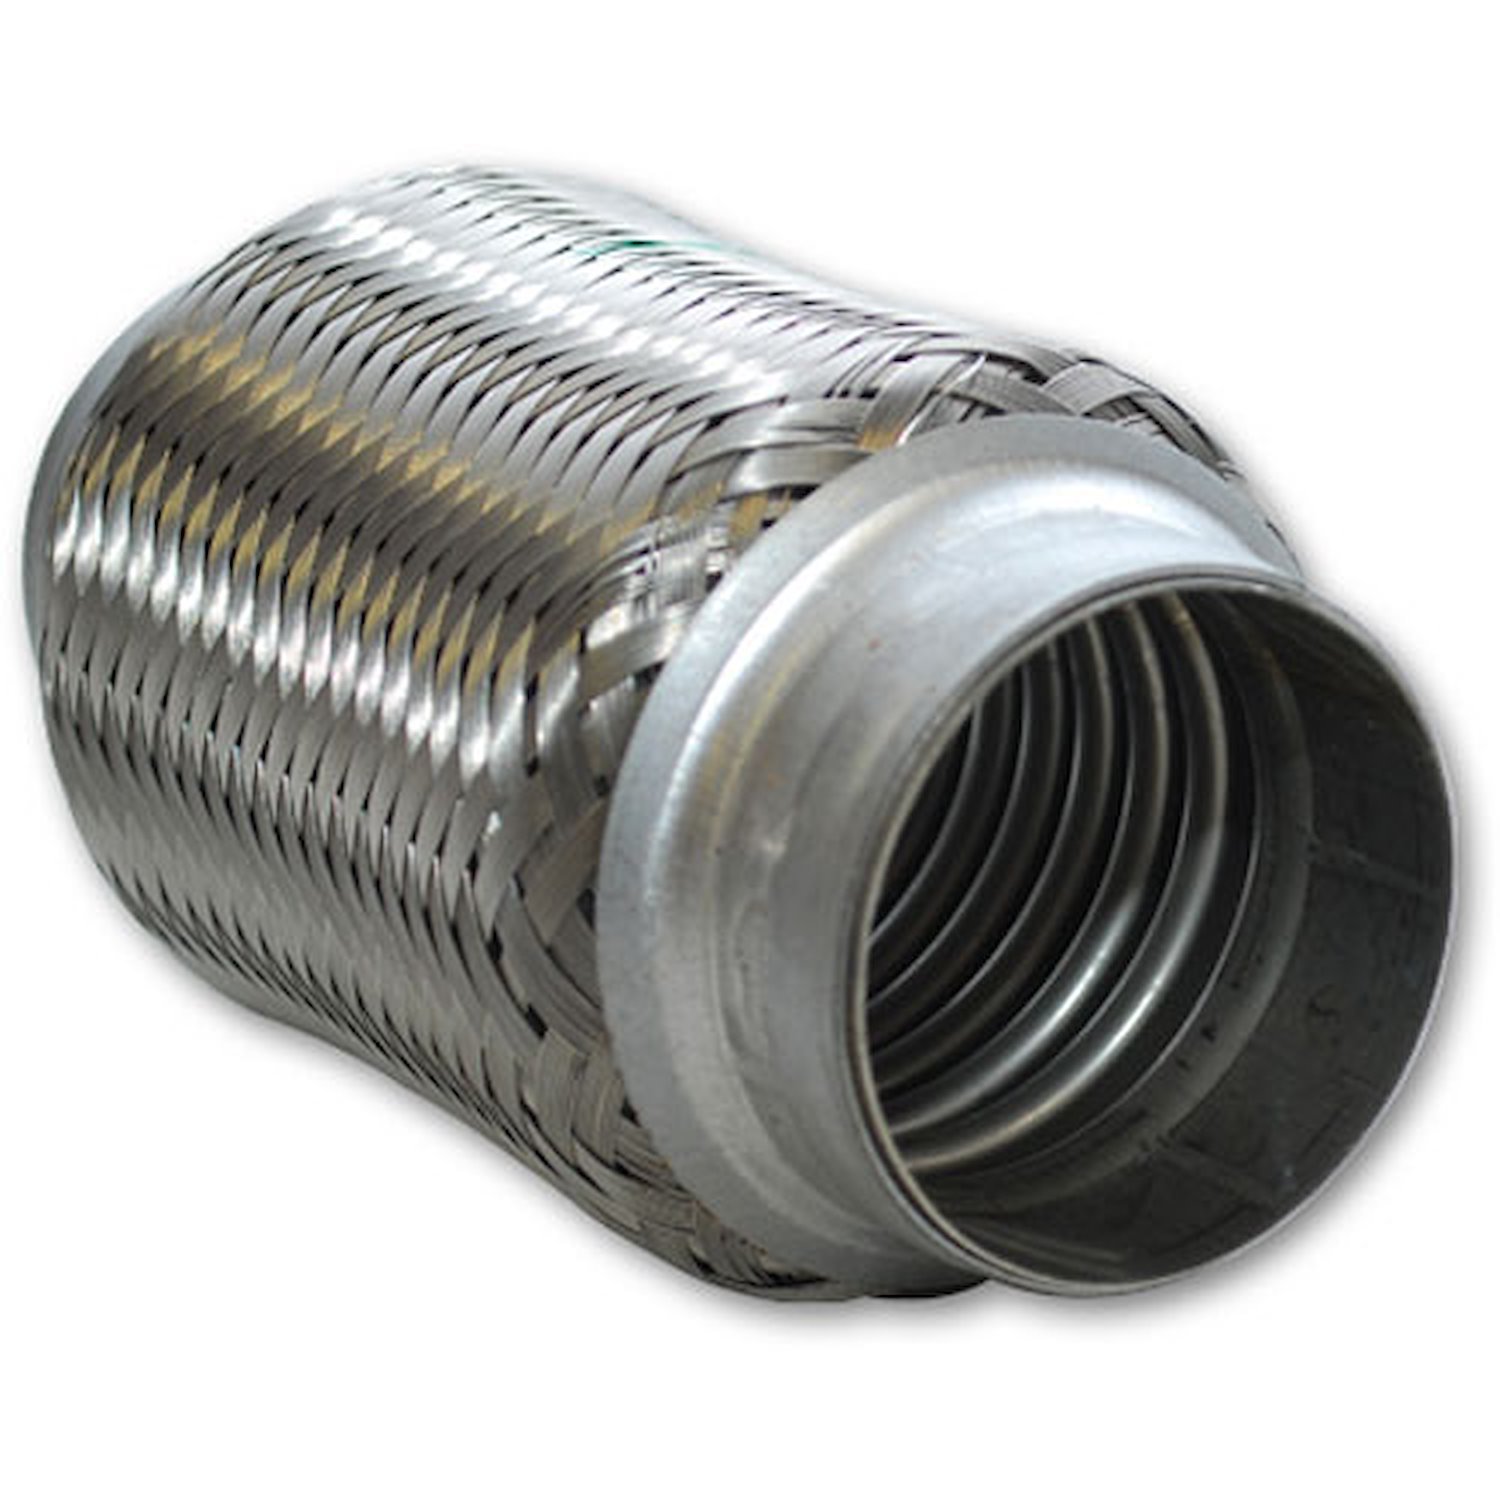 Standard Flex Coupling Without Inner Liner 2" Inlet/Outlet Diamater